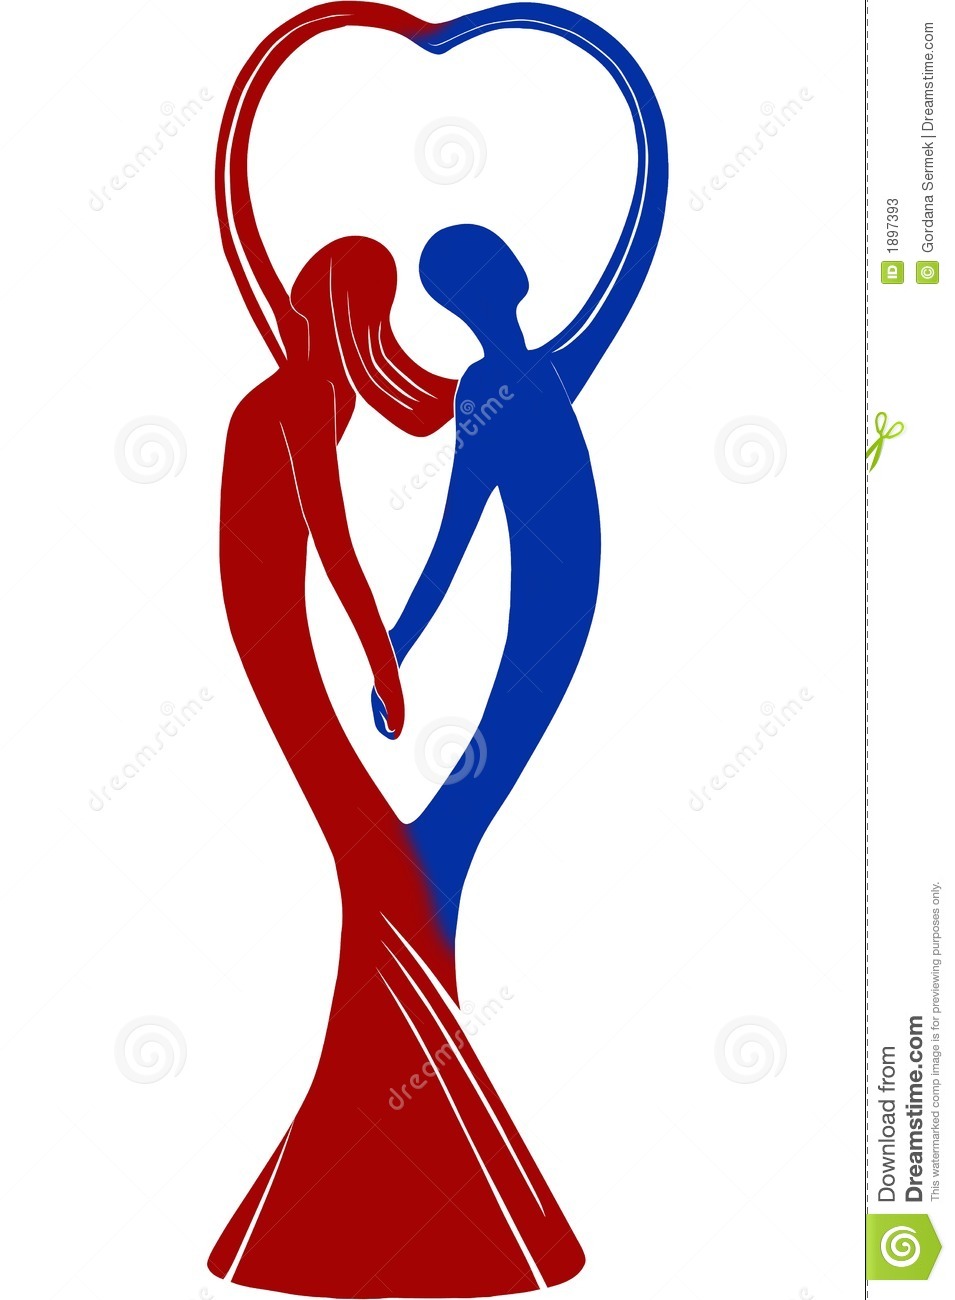 Couple In Love Shaping A Heart With Their Hands   Illustration  Red